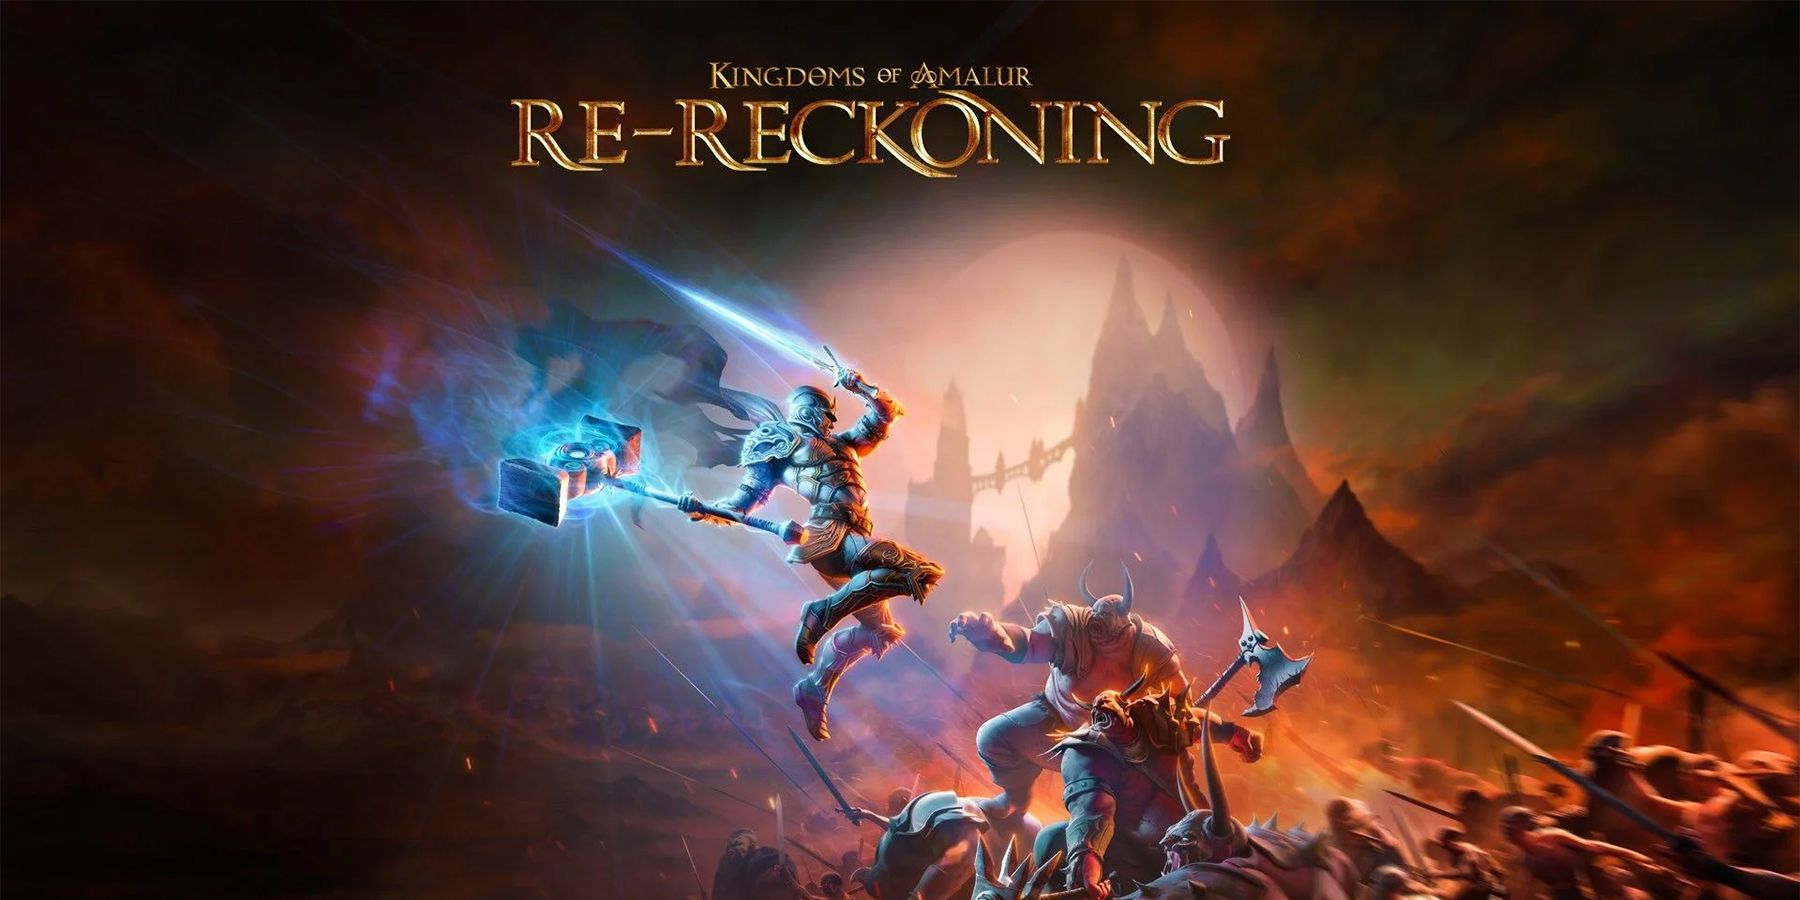 kingdoms of amalur rereckoning fatesworn expansion delayed for switch